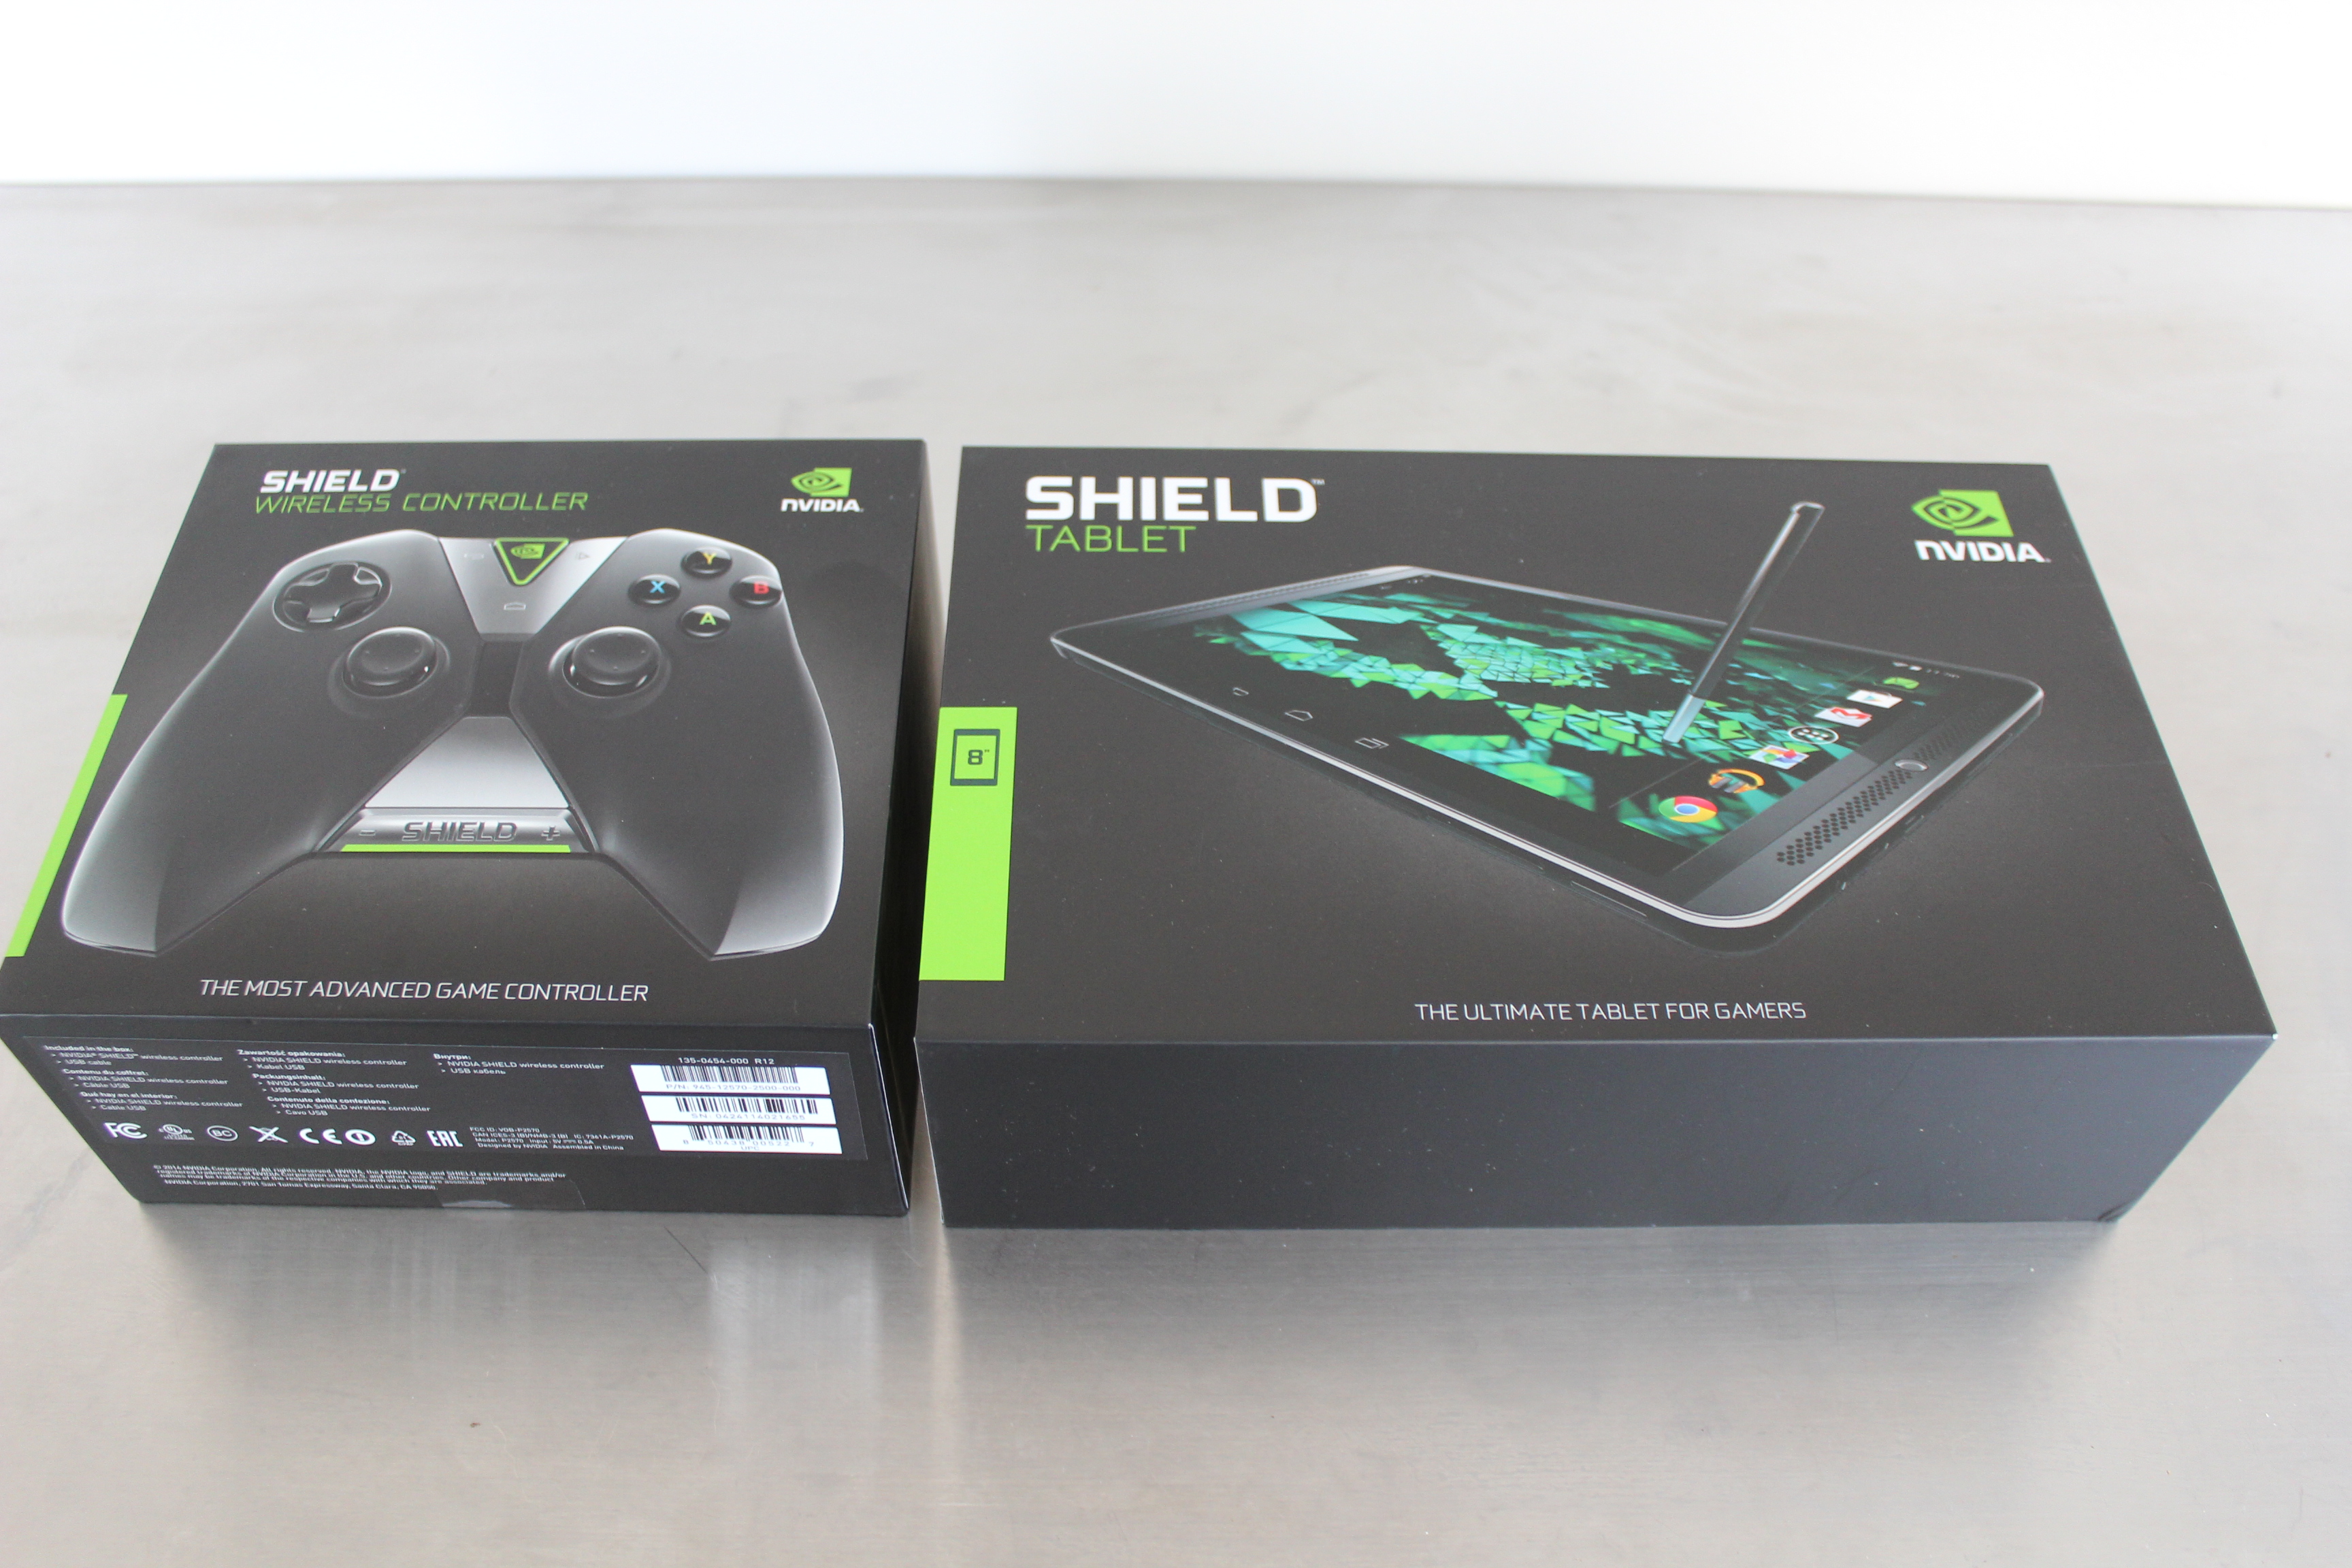 The Nvidia Shield Gaming Tablet Benchmarks Remarkably Well At $199